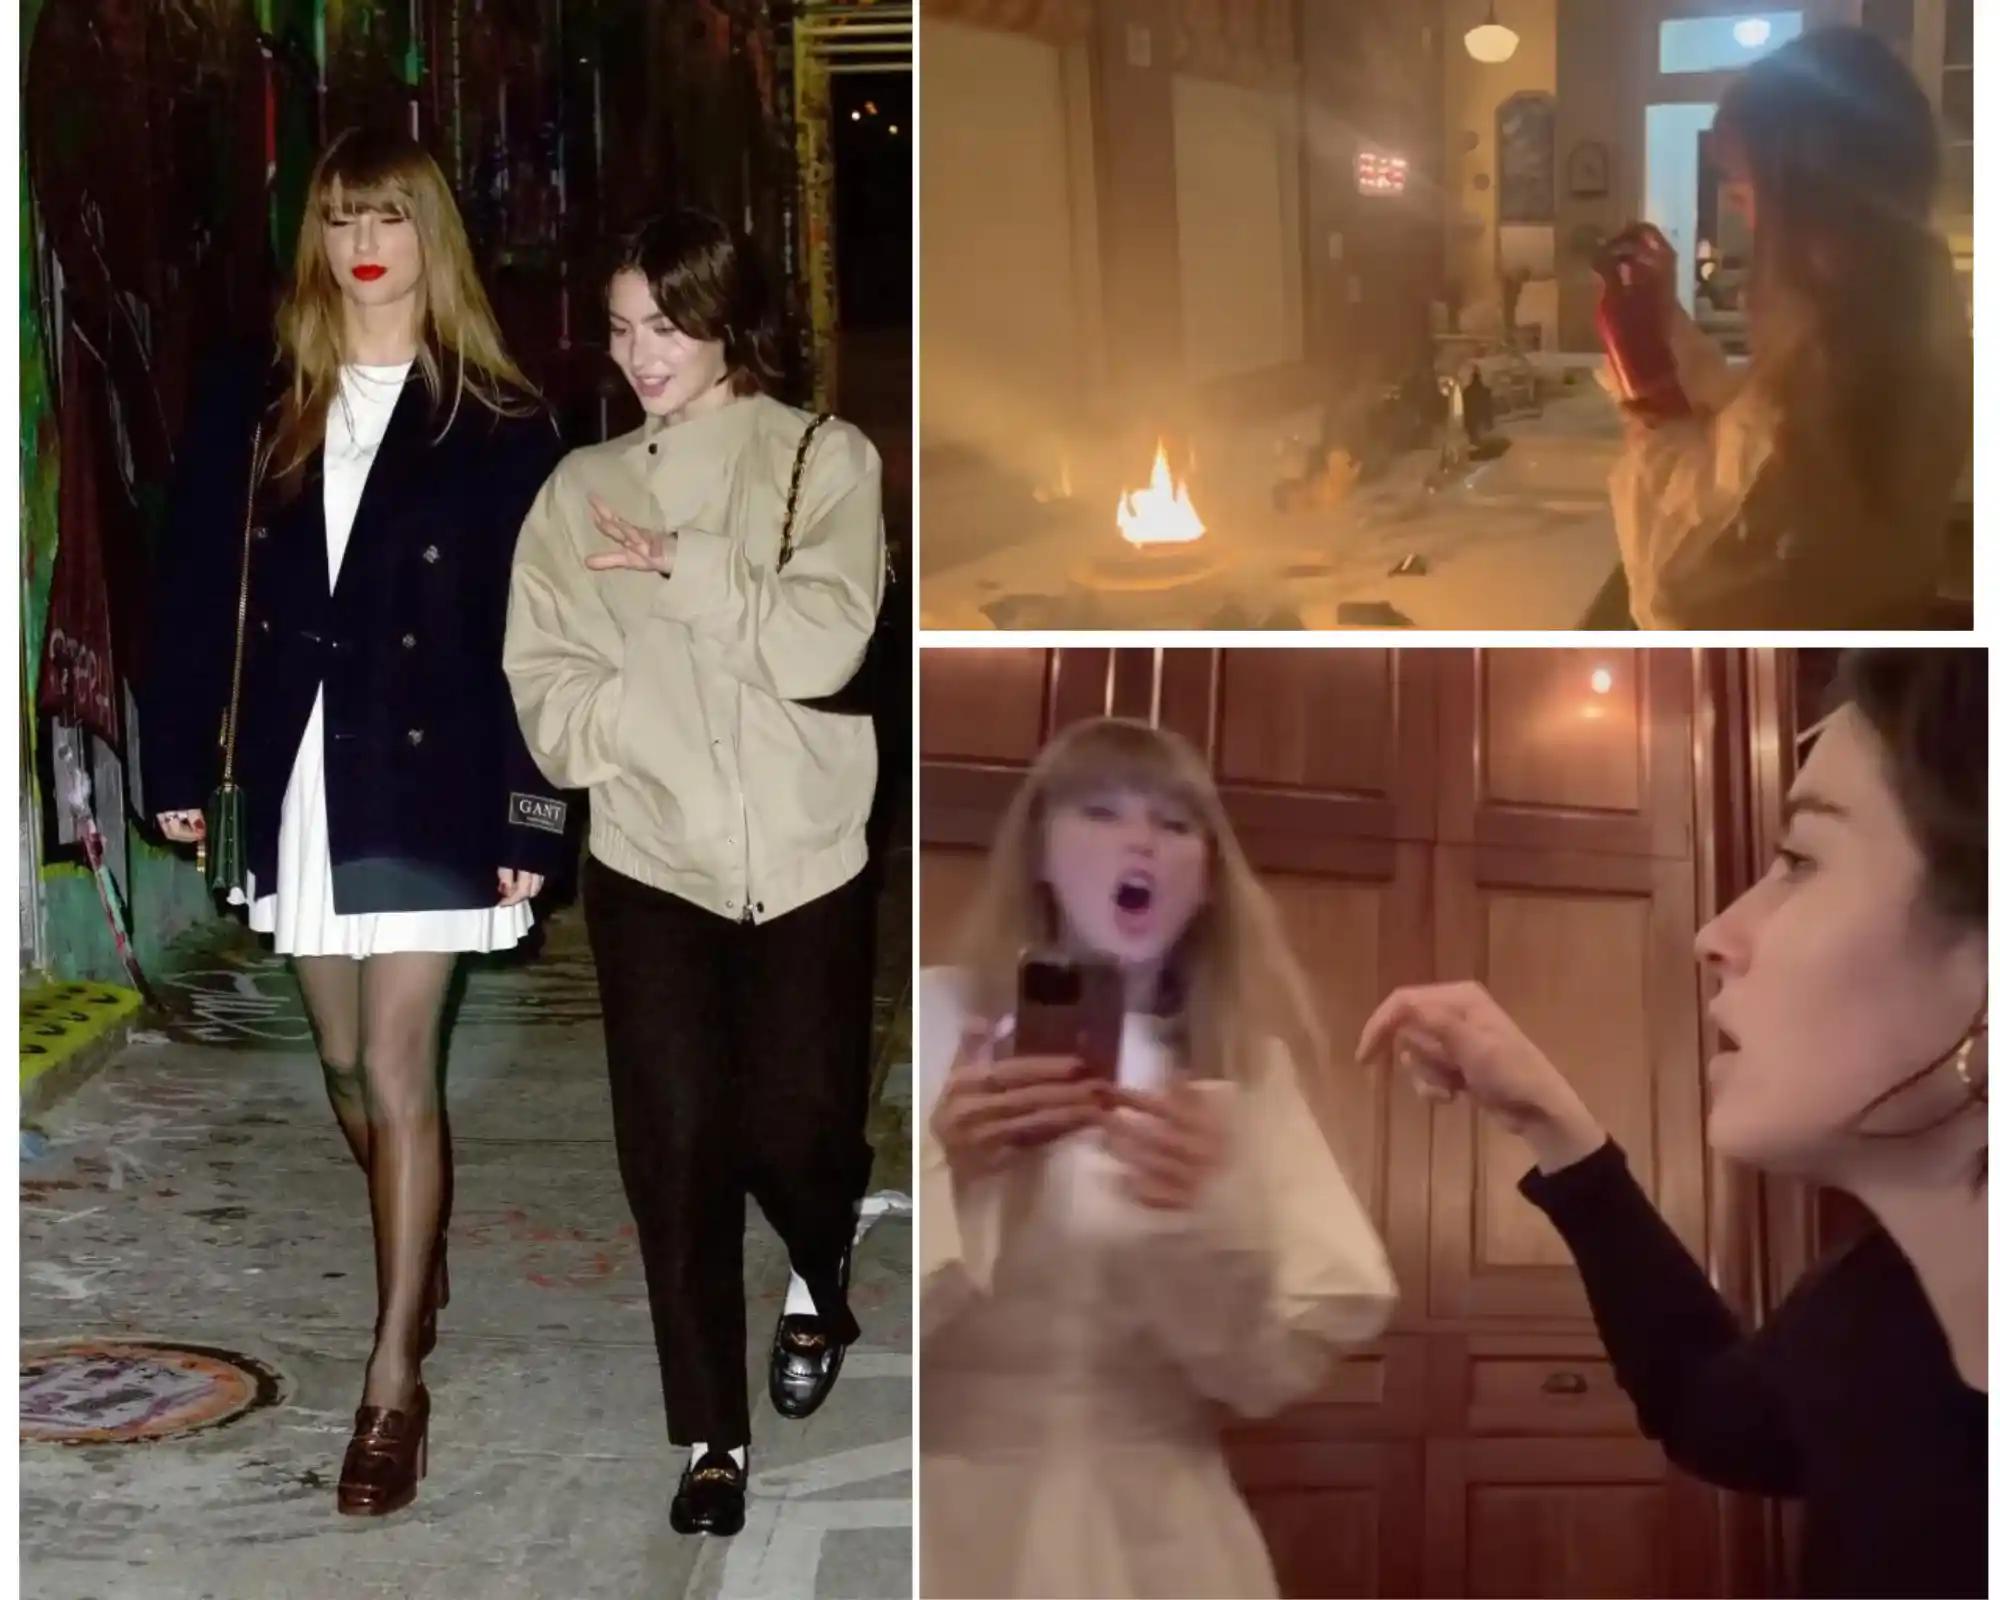 Taylor Swift Teams Up with Gracie Abrams to Extinguish Apartment Fire [Video]